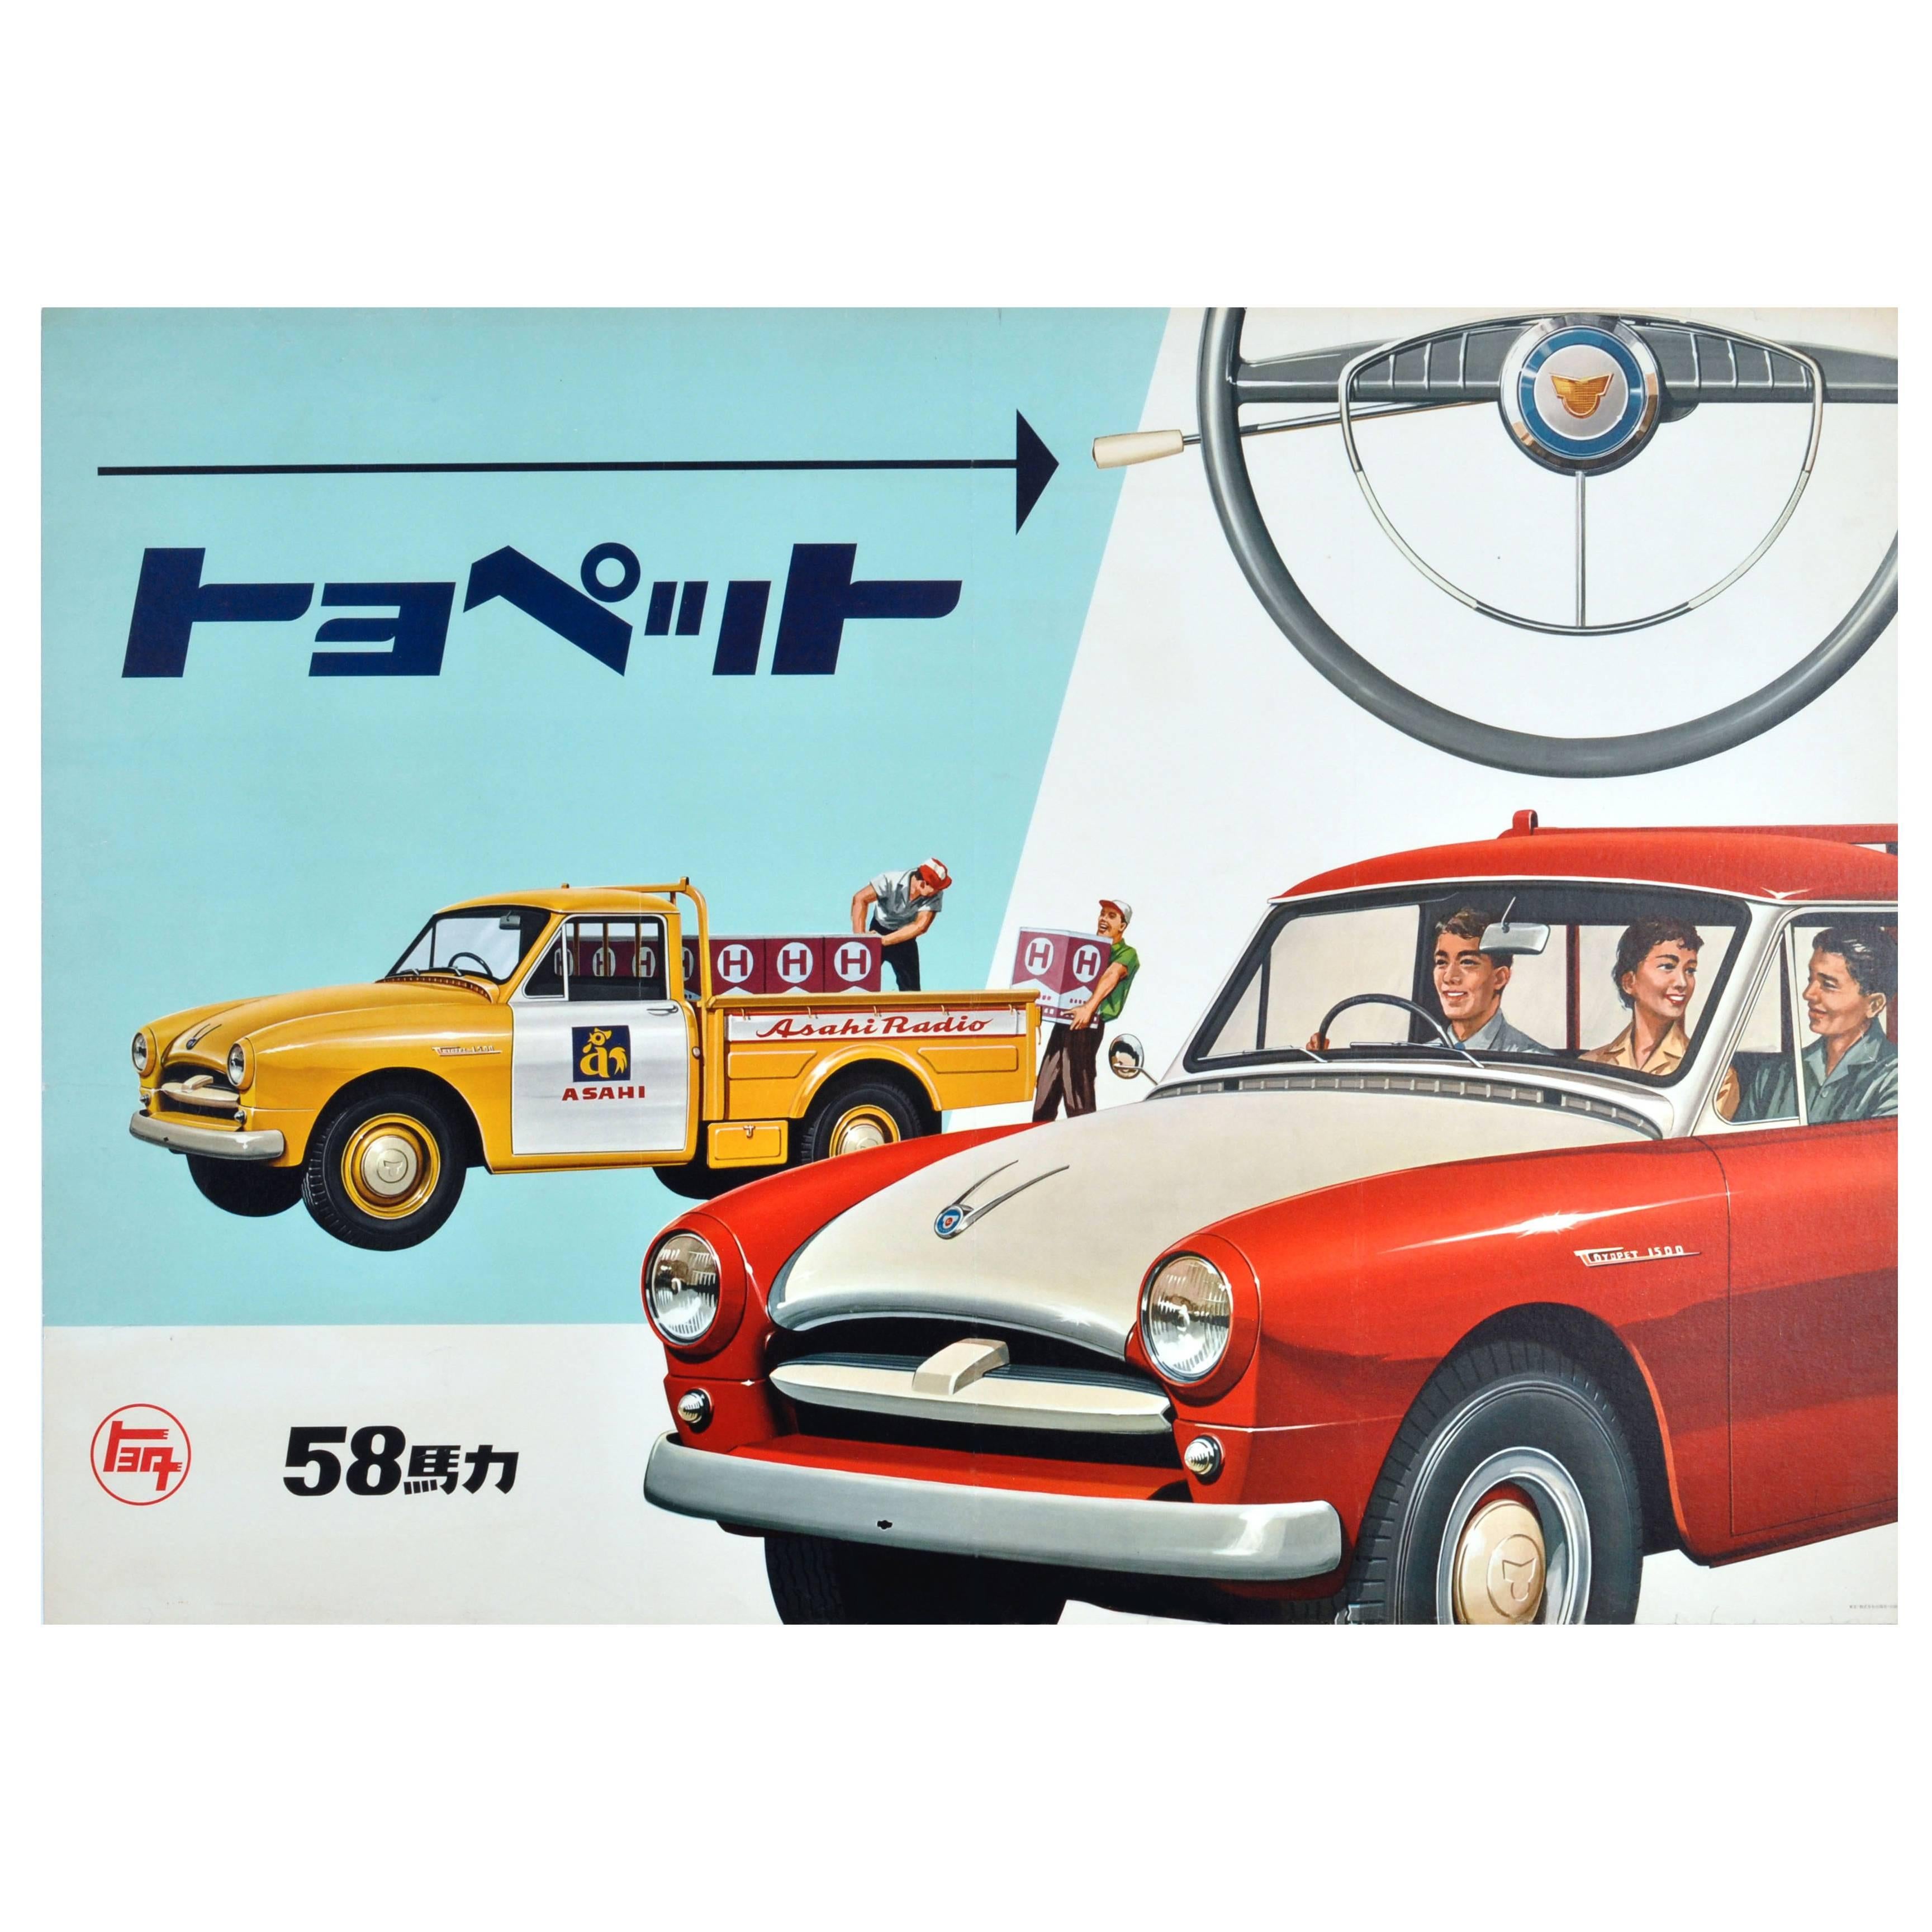 Rare Early Original Vintage Toyota Advertising Poster for Toyopet Pick Up Trucks